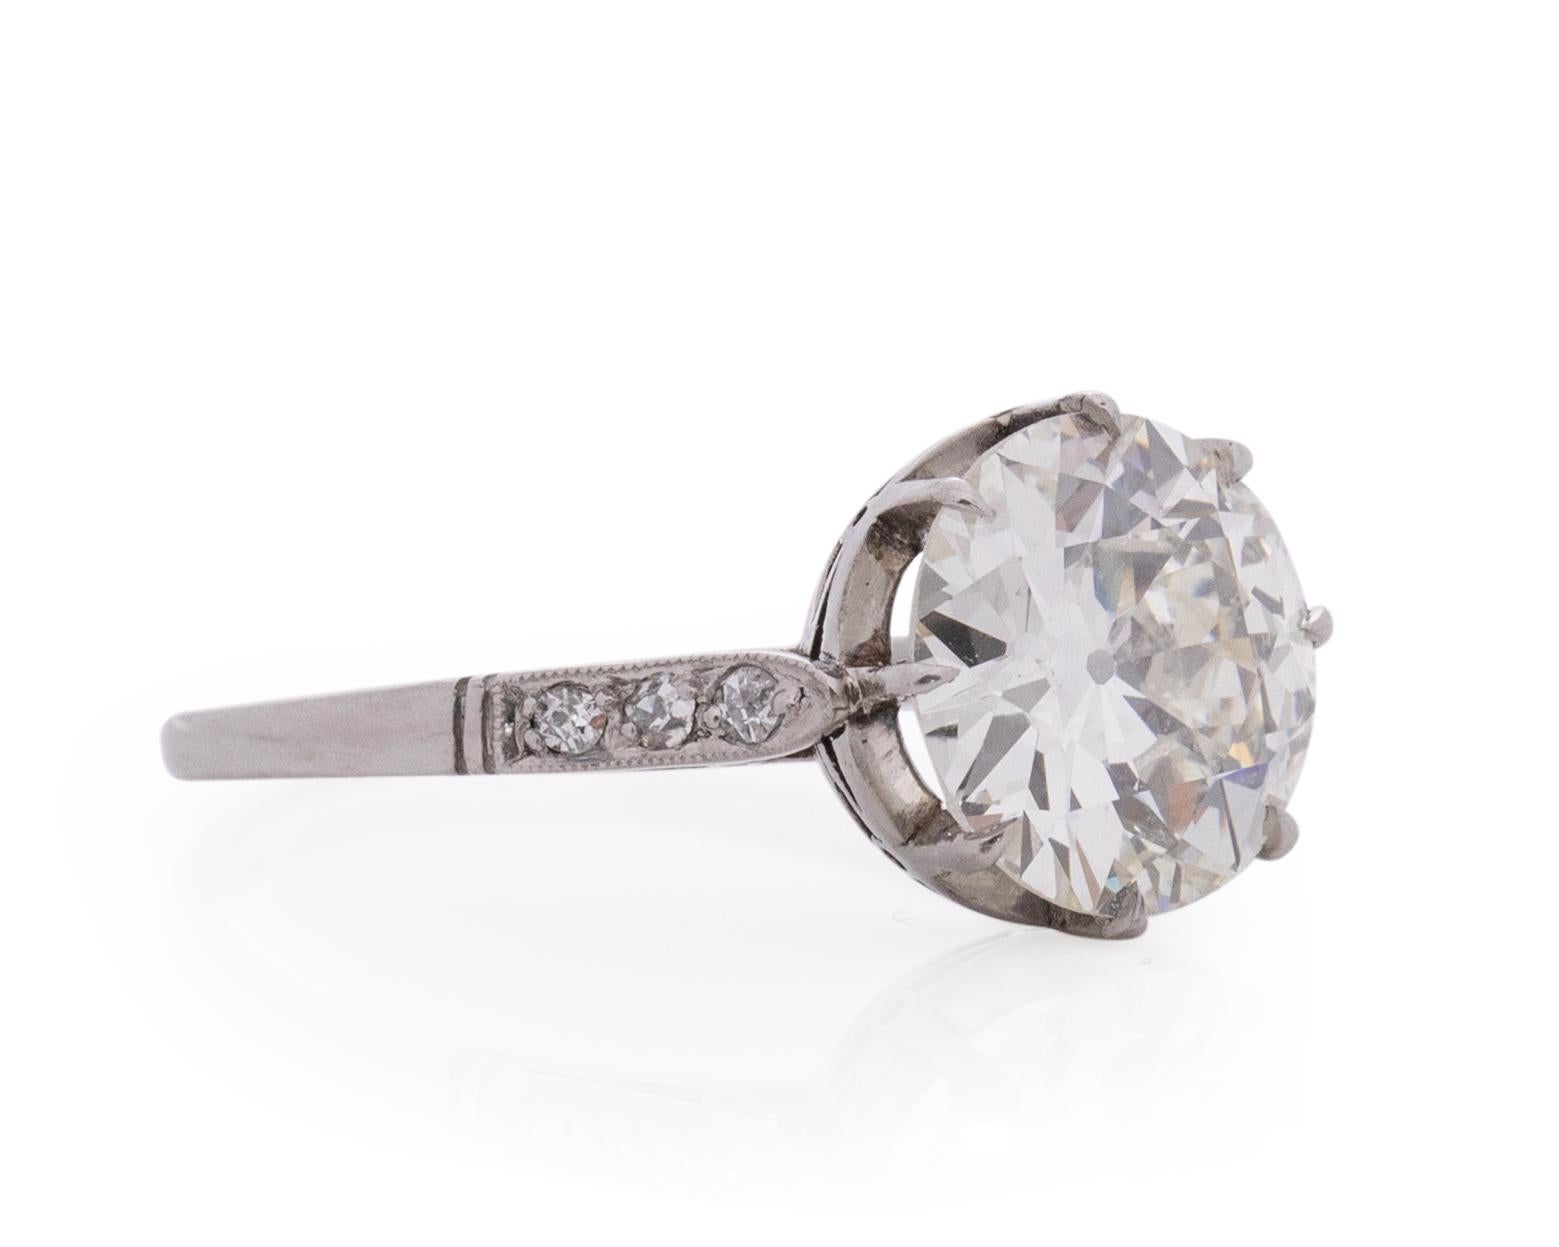 Item Details: 
Ring Size: 7.5
Metal Type: Platinum [Hallmarked, and Tested]
Weight: 3.5 grams

Center Diamond Details:
GIA REPORT #: 6214255804
Weight: 2.69 Carat
Cut: Old European brilliant
Color: K
Clarity: SI1
Measurements: 9.38 x 9.31 x